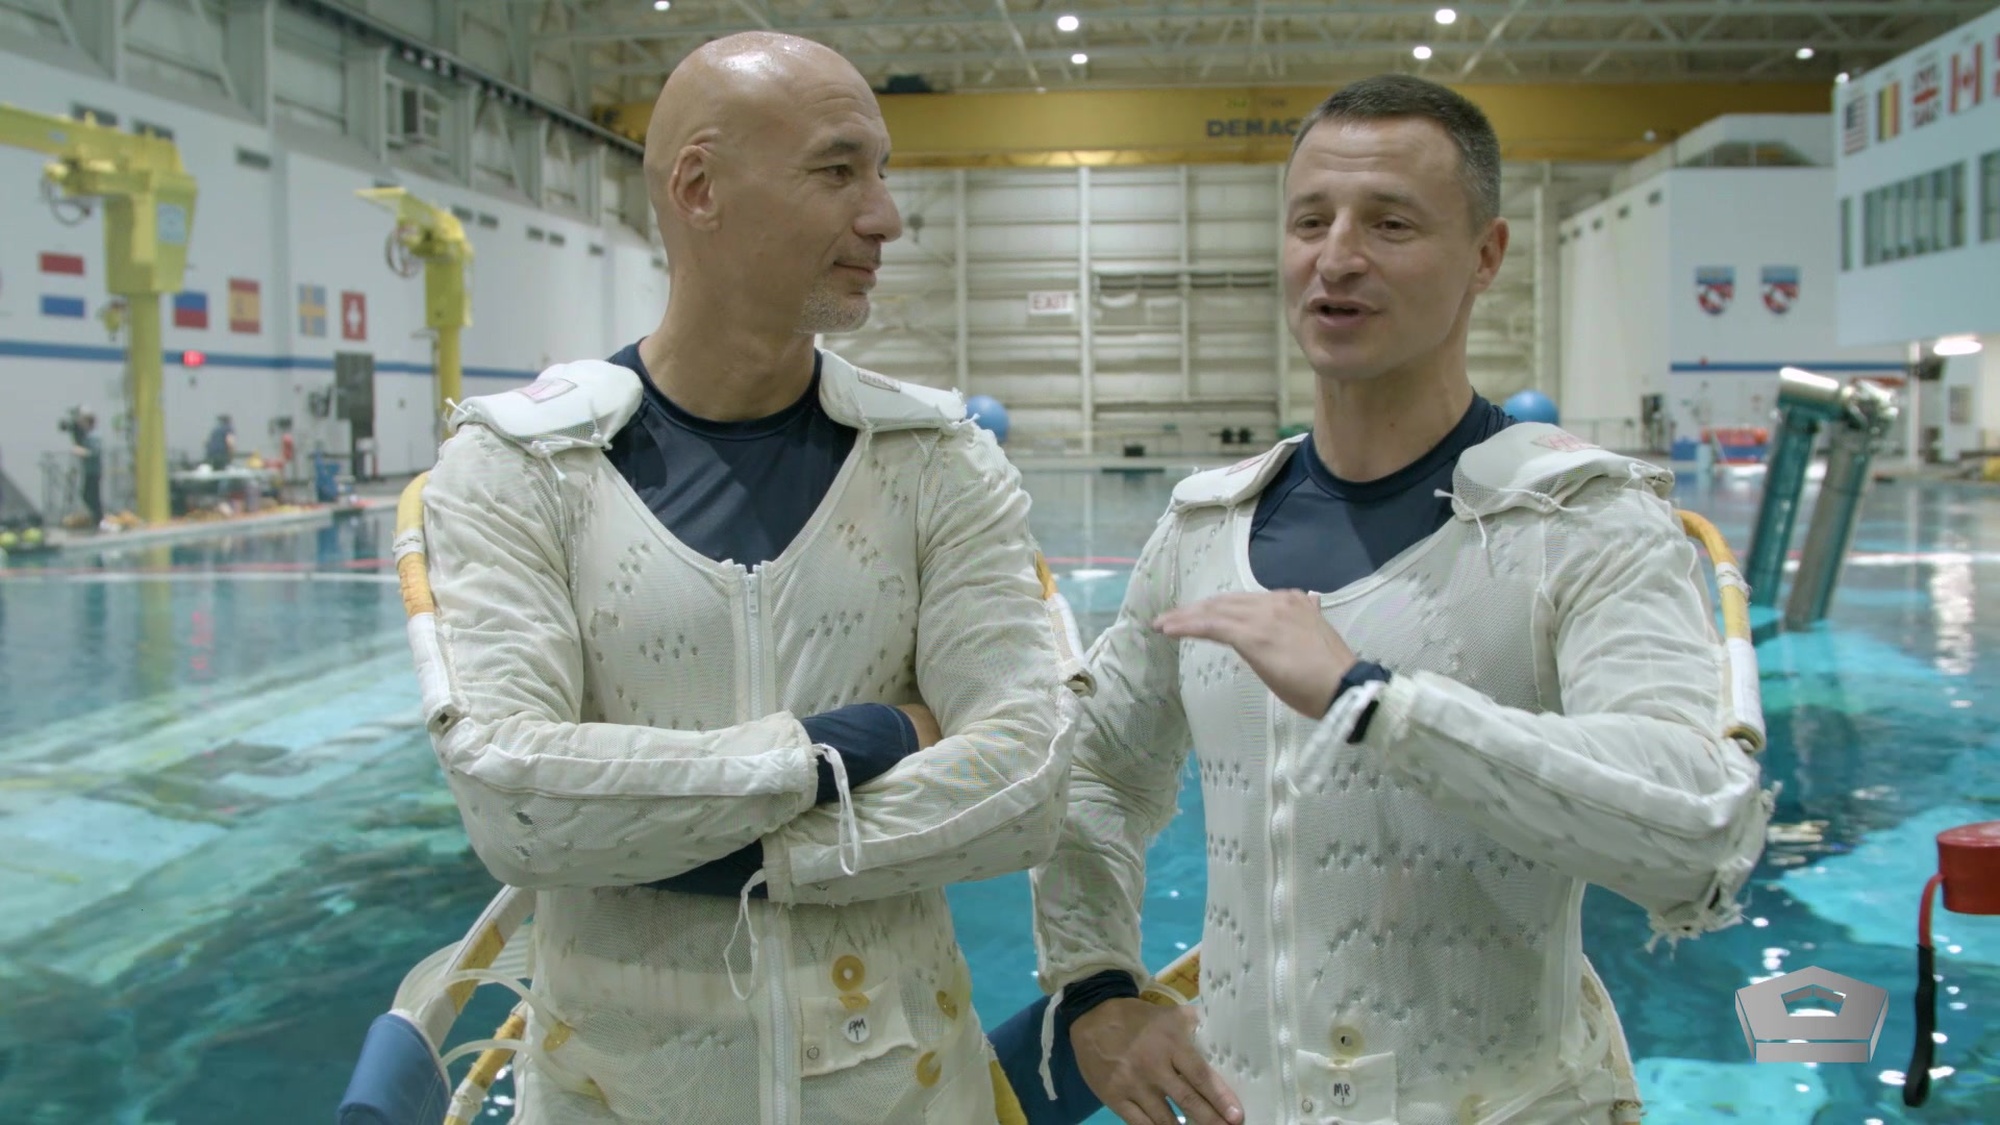 Two astronauts are stand in front of a pool.